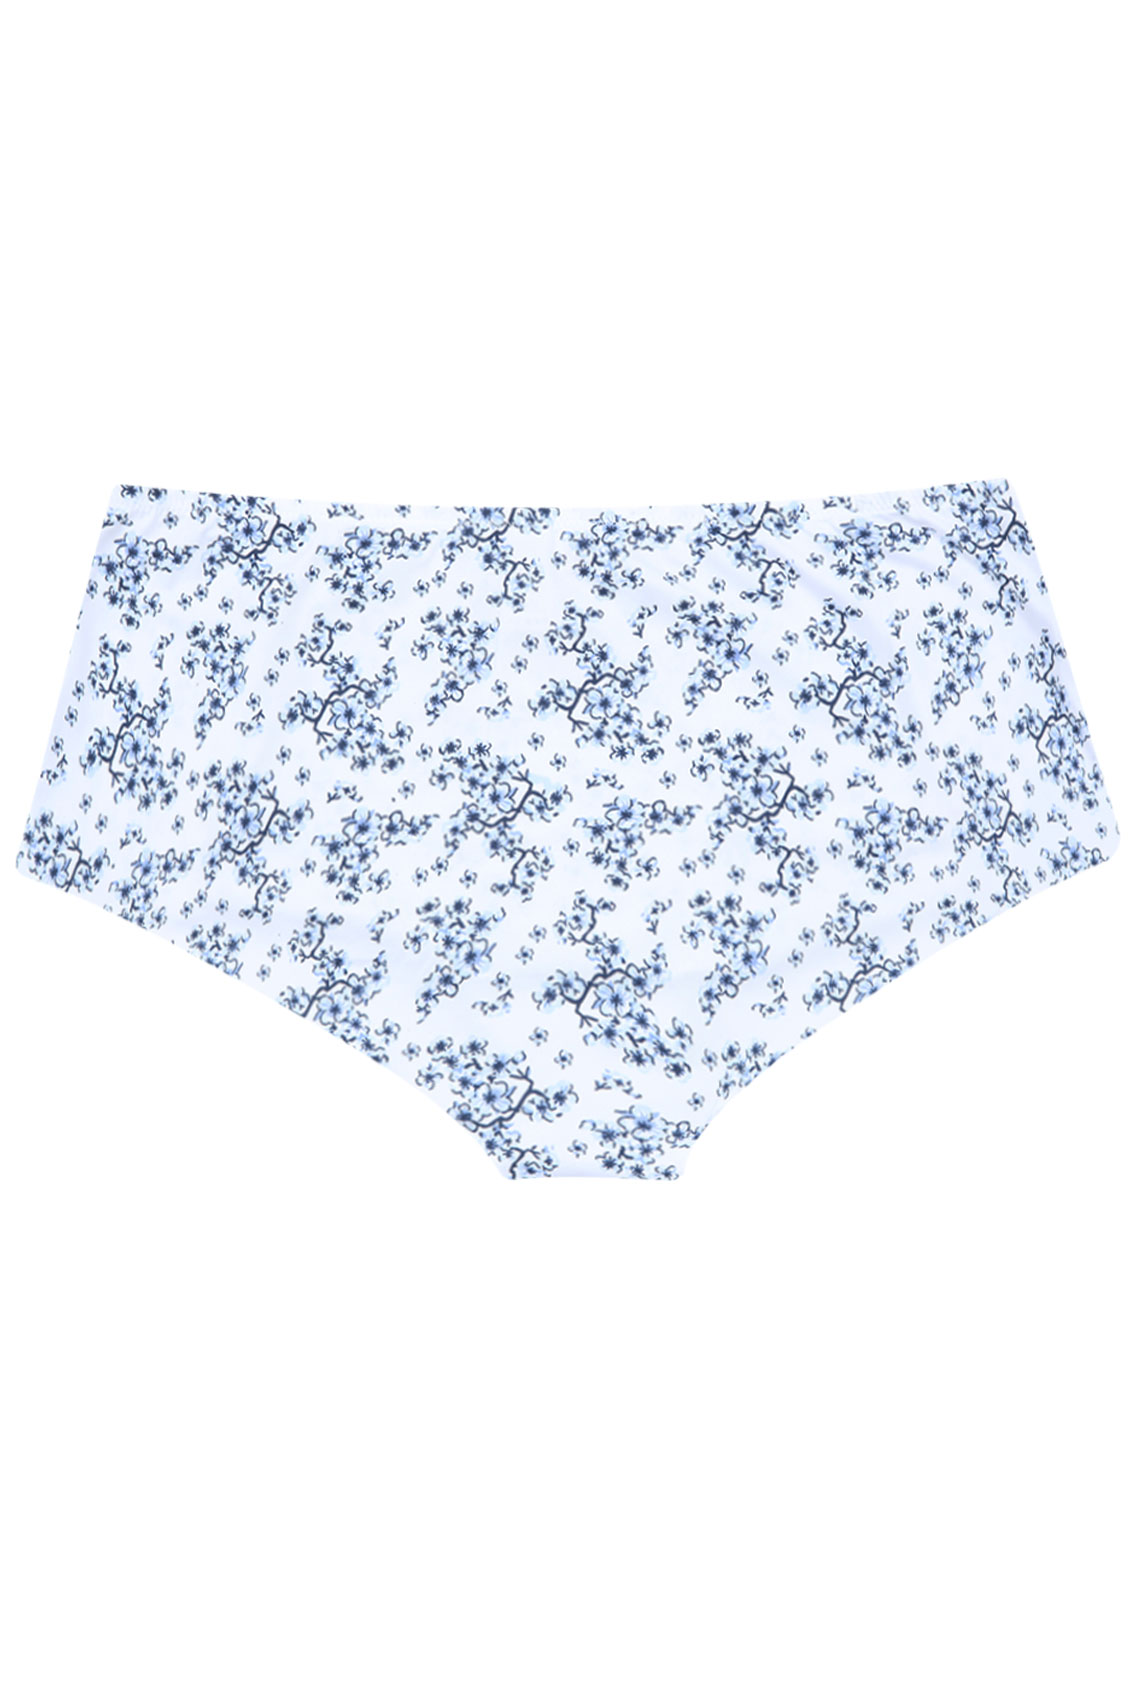 Blue & White Floral Print Brief With Bows* Plus Size 14 to 32